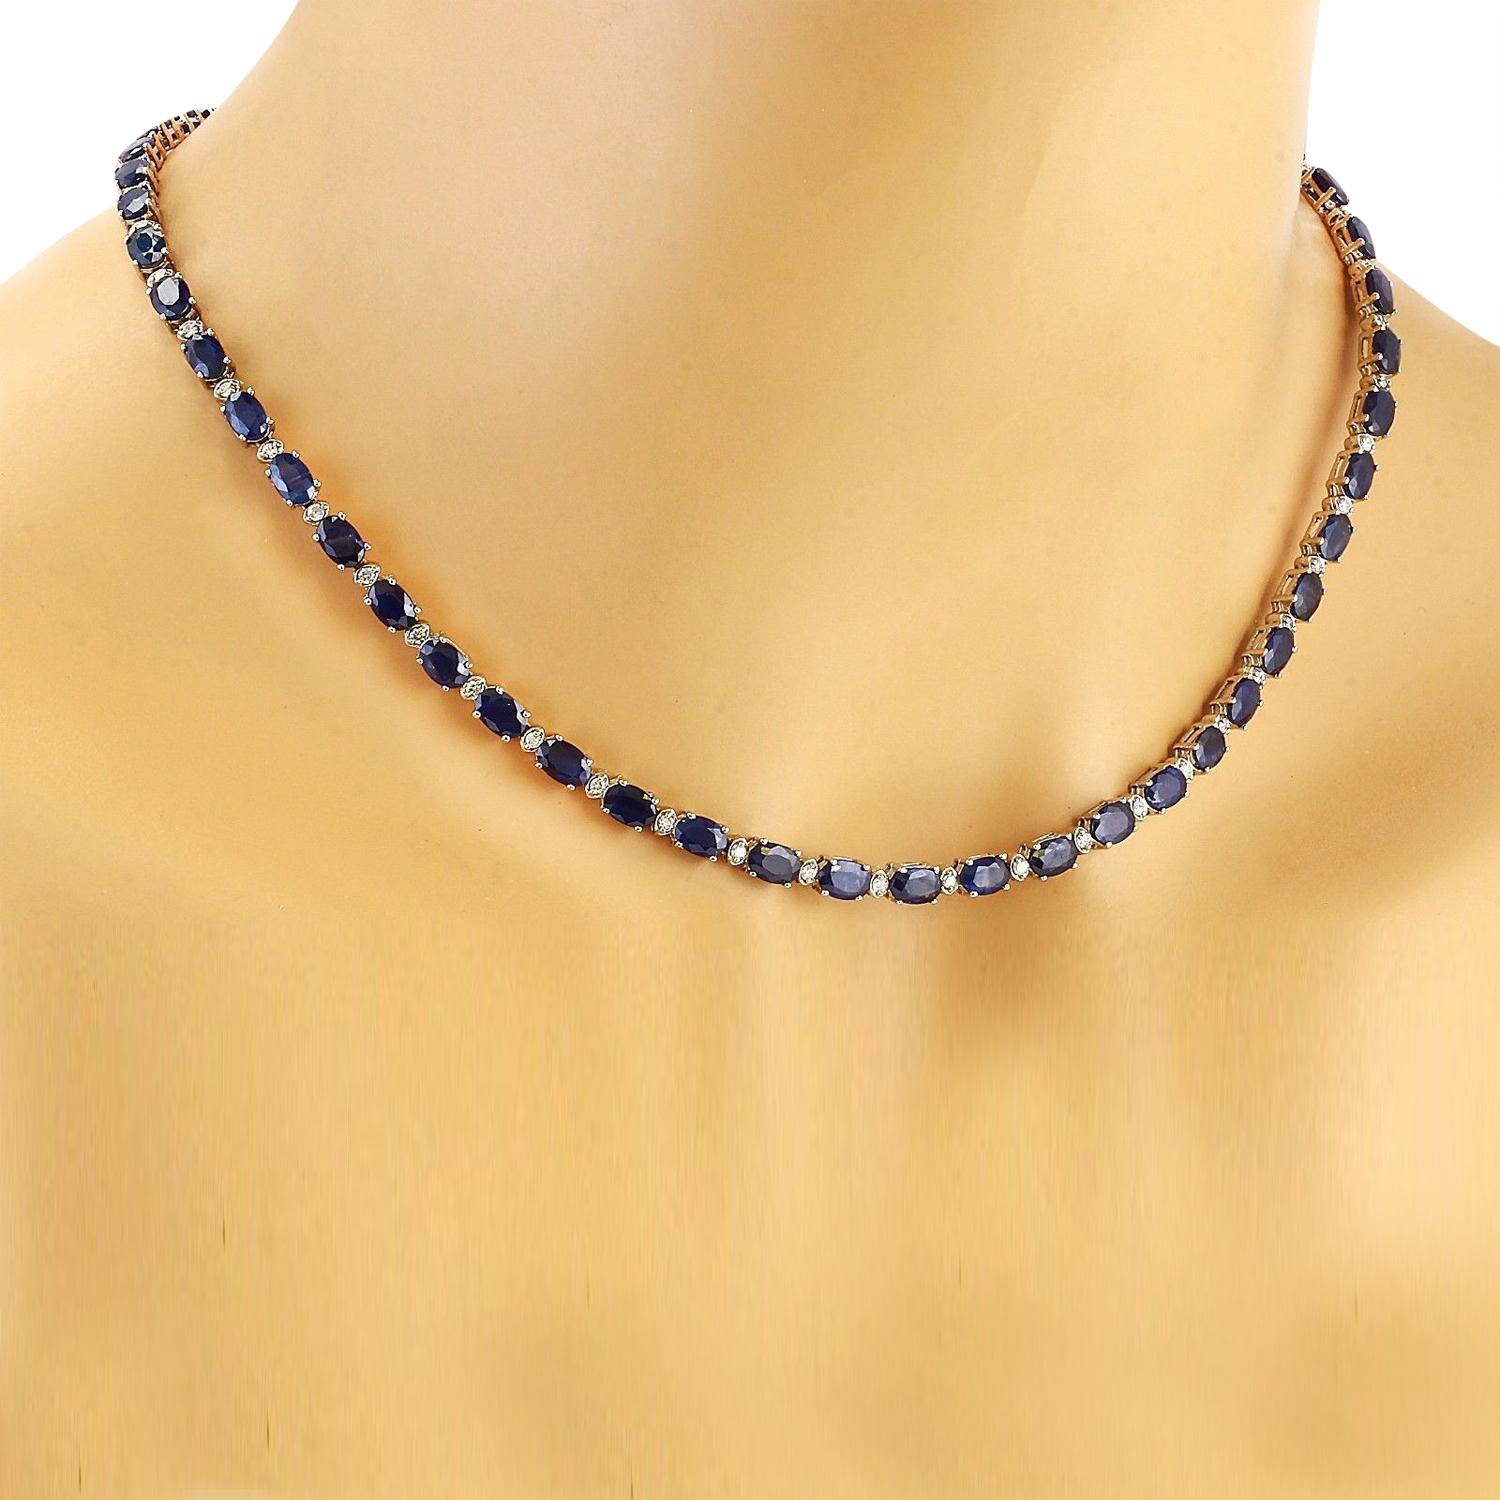 31.25 Carat Natural Sapphire 14K Solid White Gold Diamond Necklace
 Item Type: Necklace
 Item Style: Tennis
 Item Length: 17 Inches
 Material: 18K White Gold
 Mainstone: Sapphire
 Stone Color: Blue
 Stone Weight: 30.00 Carat
 Stone Shape: Oval
